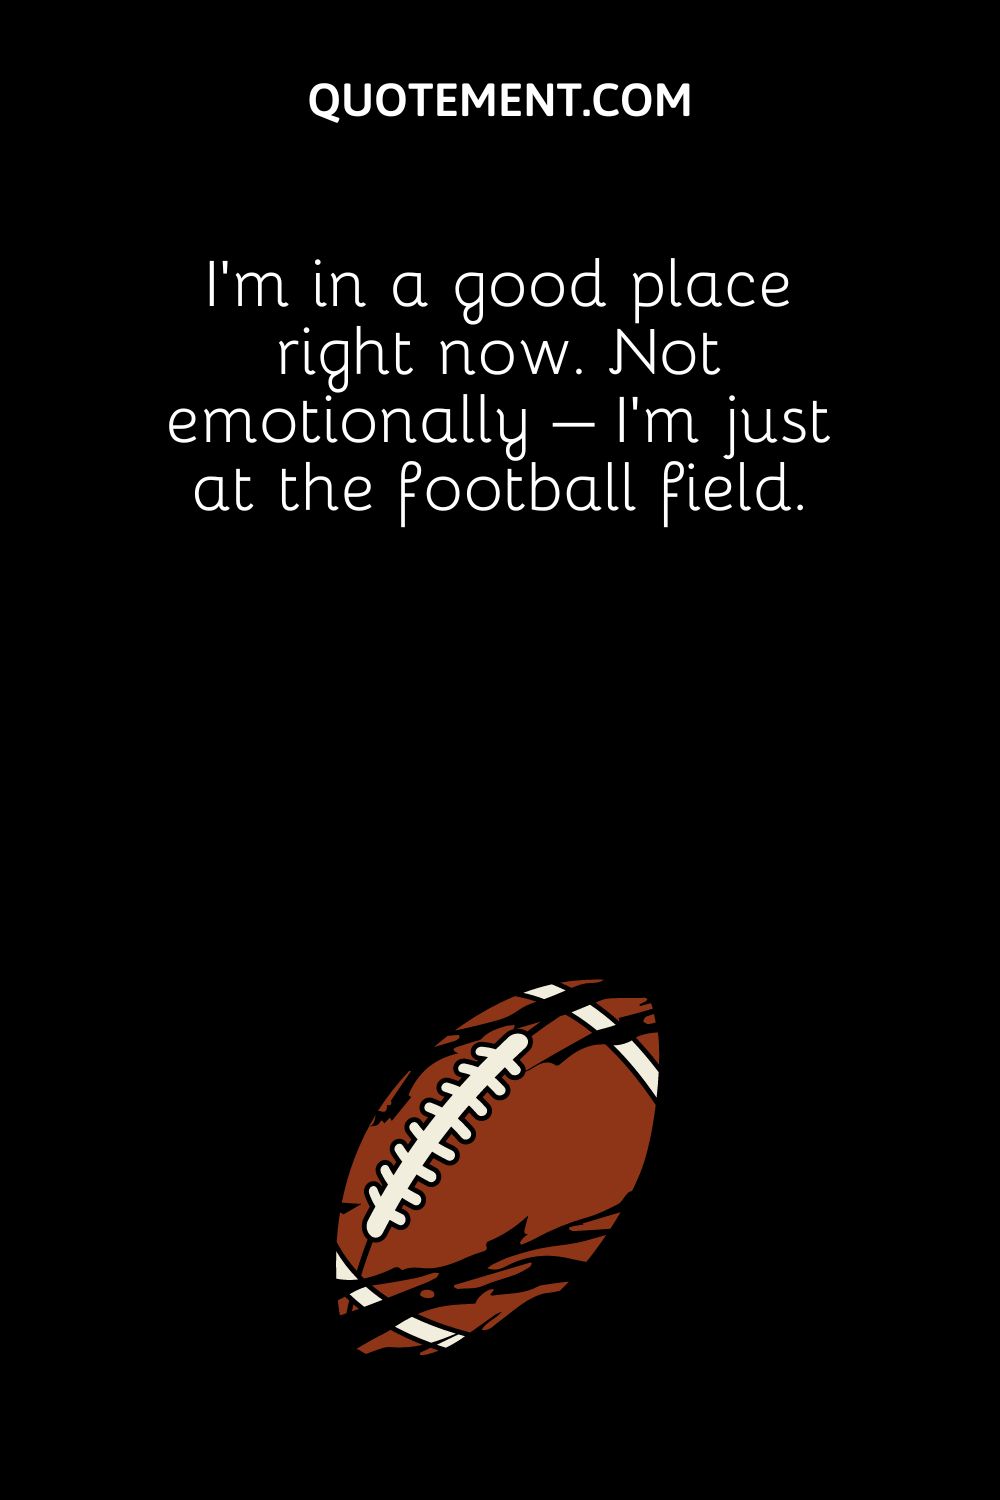 I’m in a good place right now. Not emotionally – I’m just at the football field